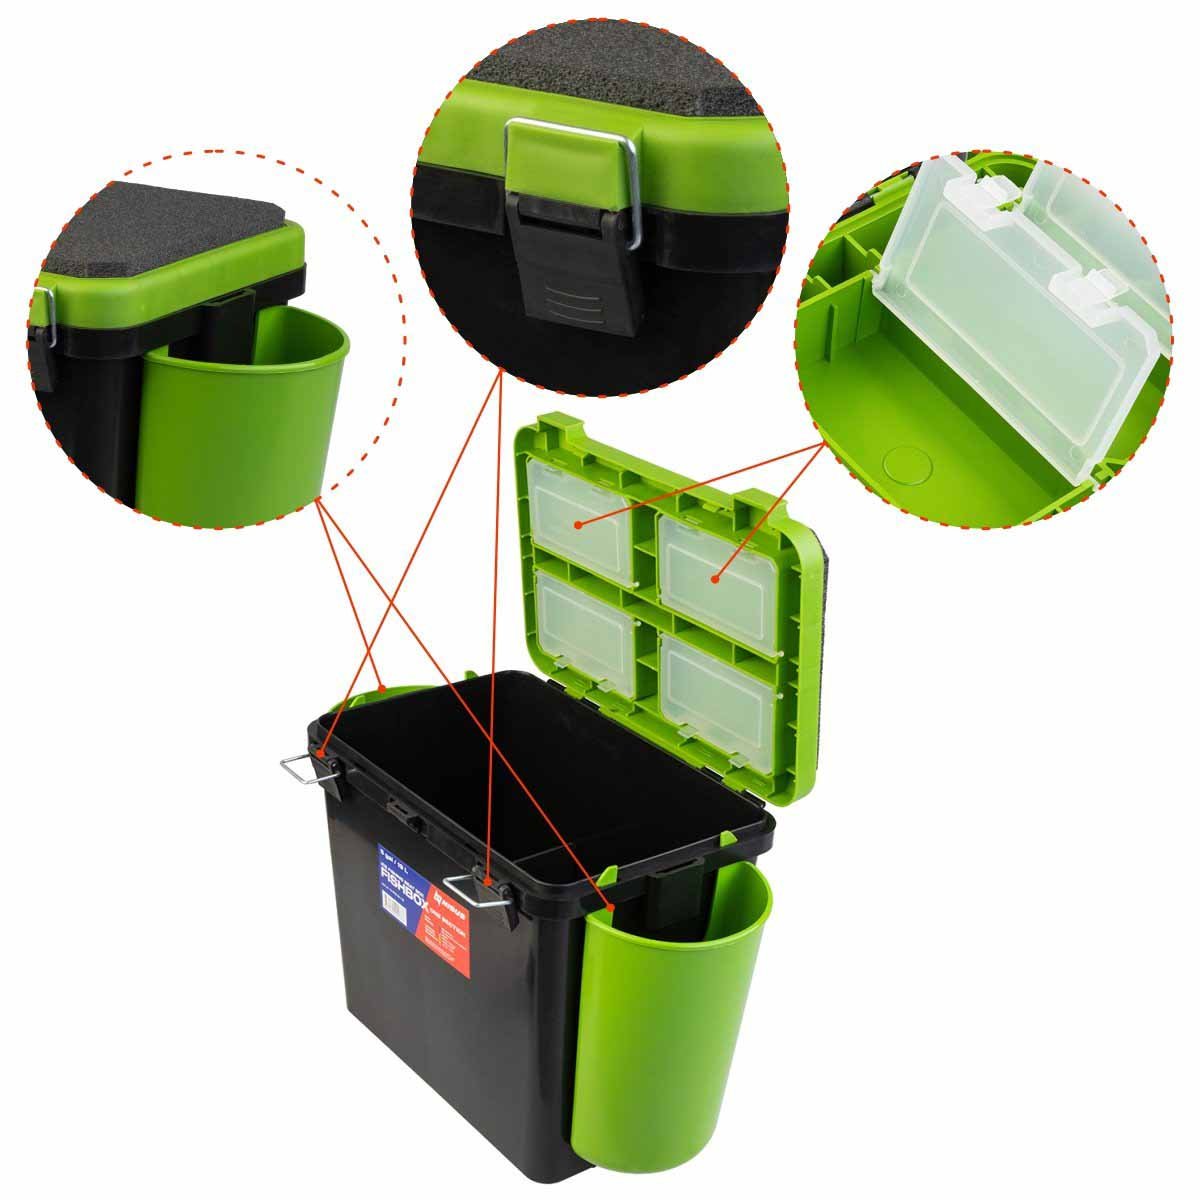 FishBox Large 5 gal Box for Ice Fishing is equipped with 2 plastic side pockets and 4 plastic boxes for handy storage.